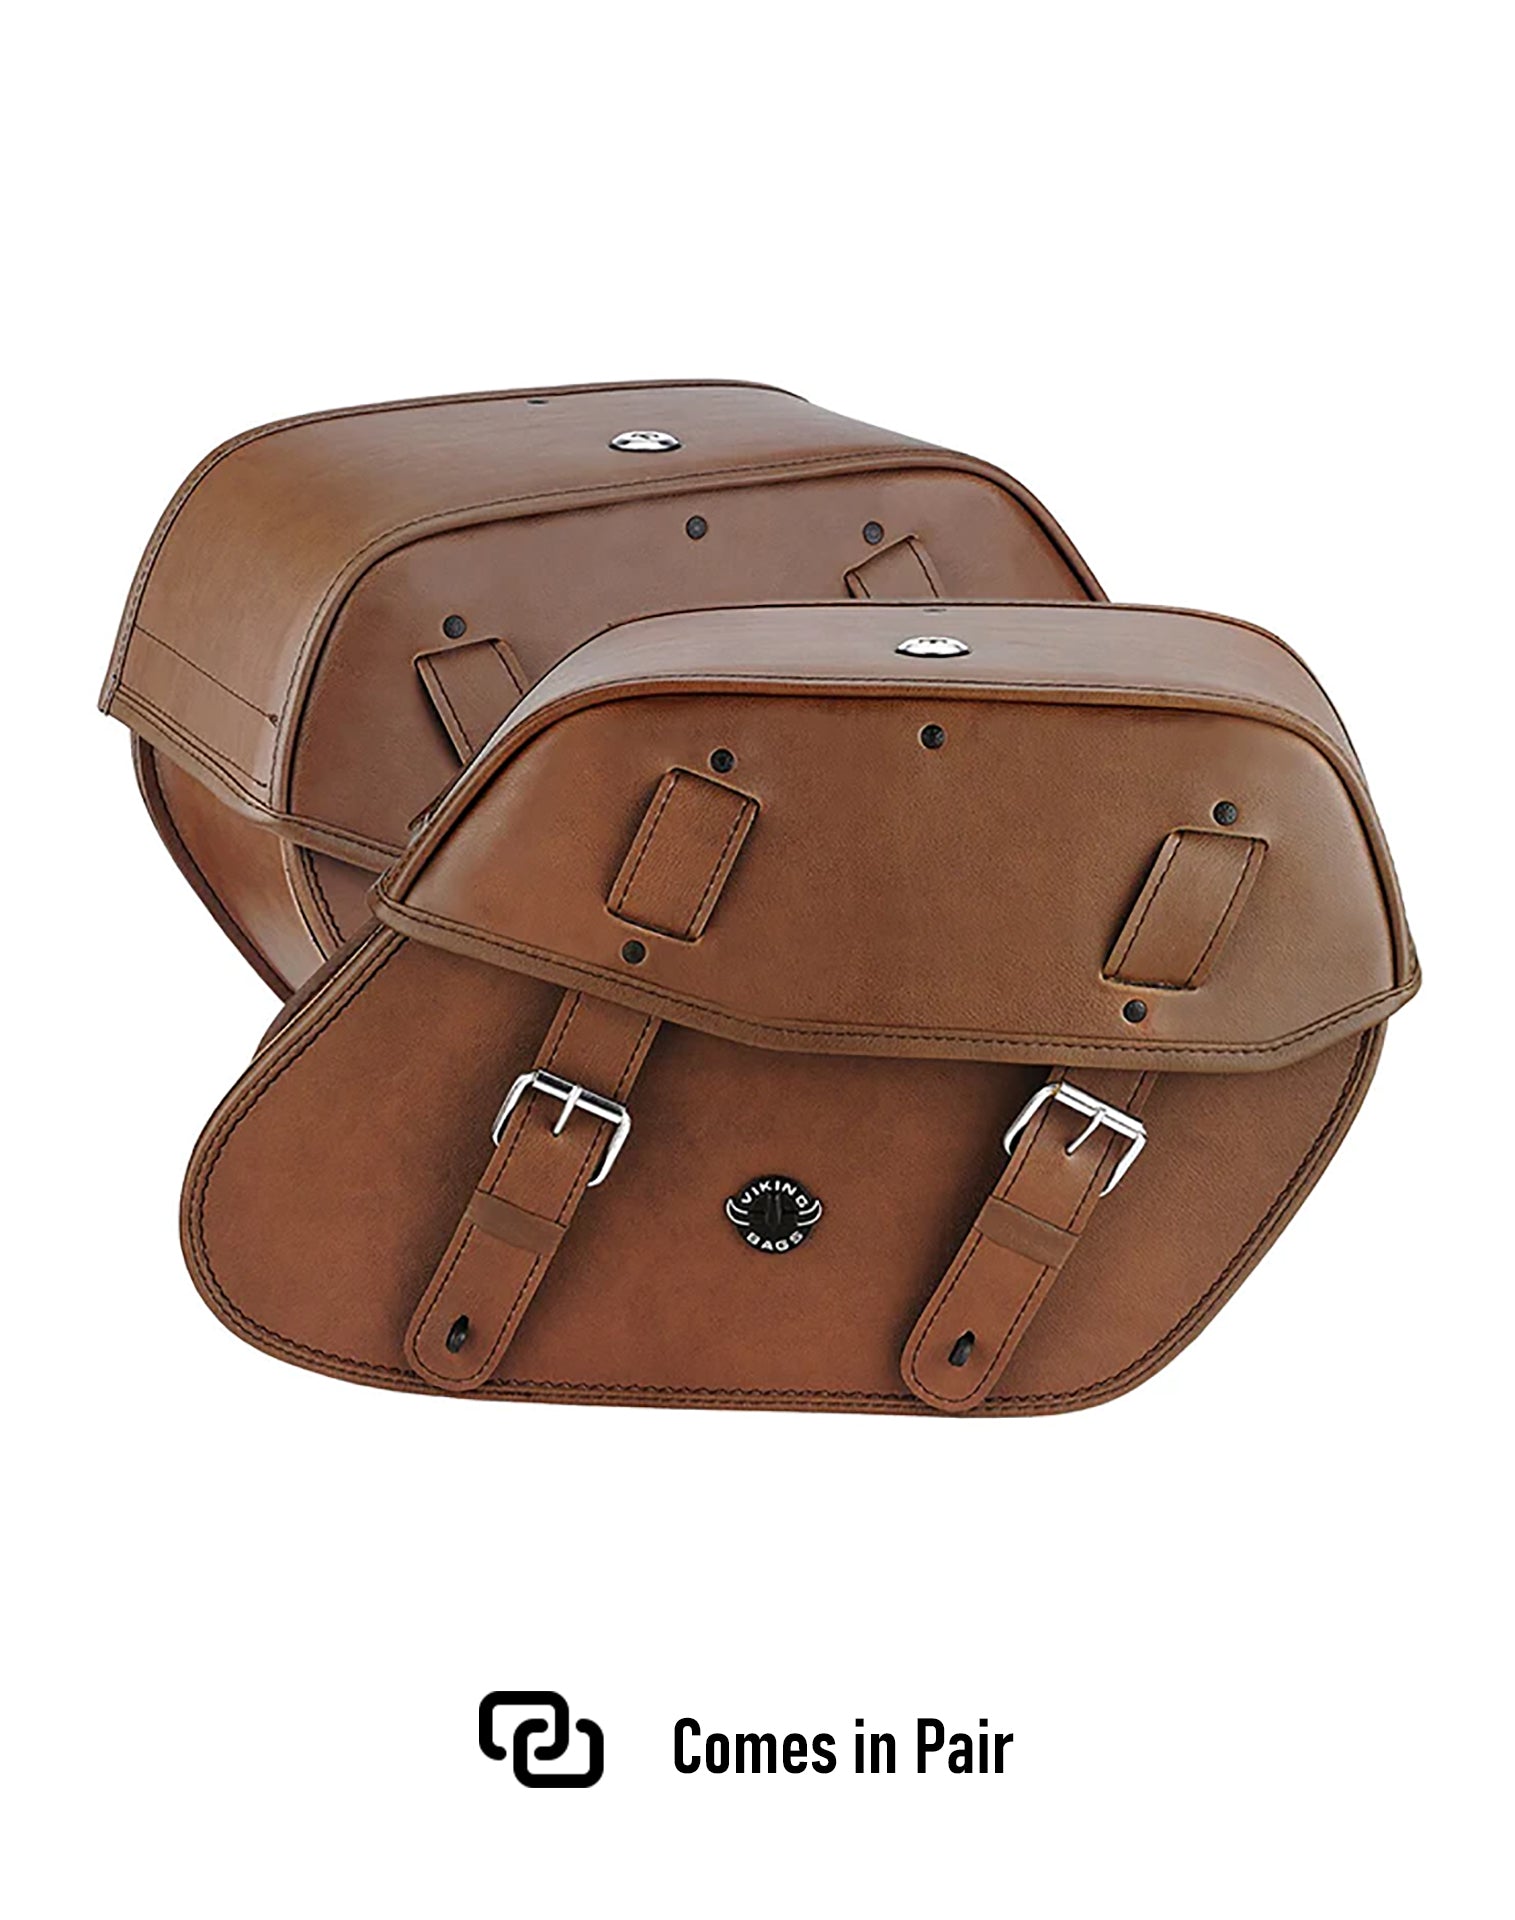 Viking Odin Brown Large Honda Vtx 1800 C Leather Motorcycle Saddlebags Weather Resistant Bags Comes in Pair